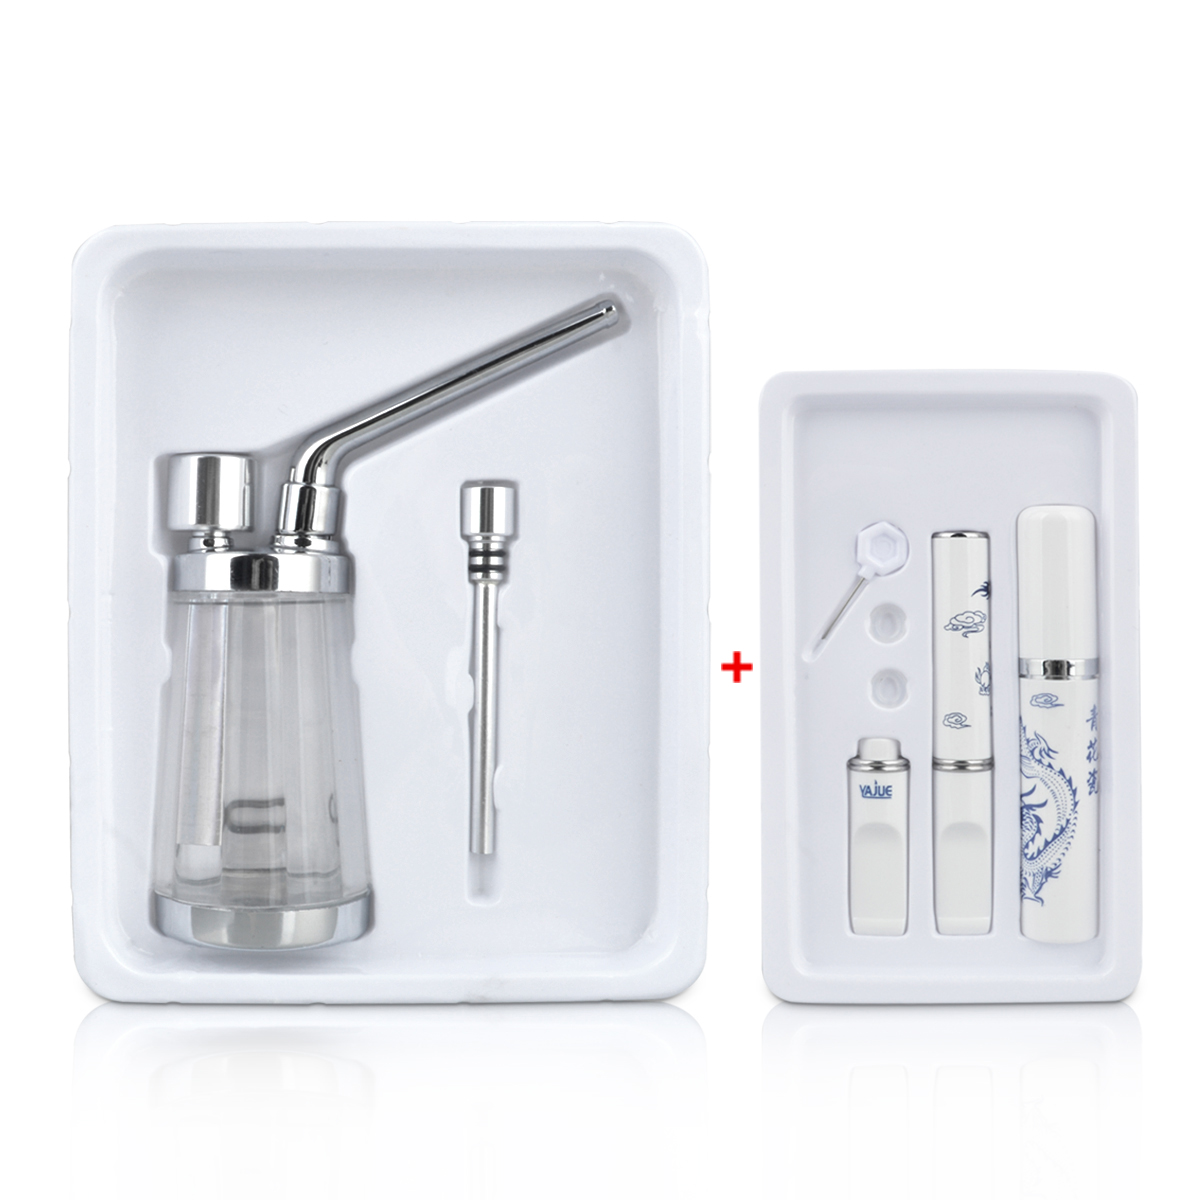 1X High Quality Hookah Mini Smoking Pipe Glass And Water Pipe Small Shisha  Clear From Smokingbruce, $3.24